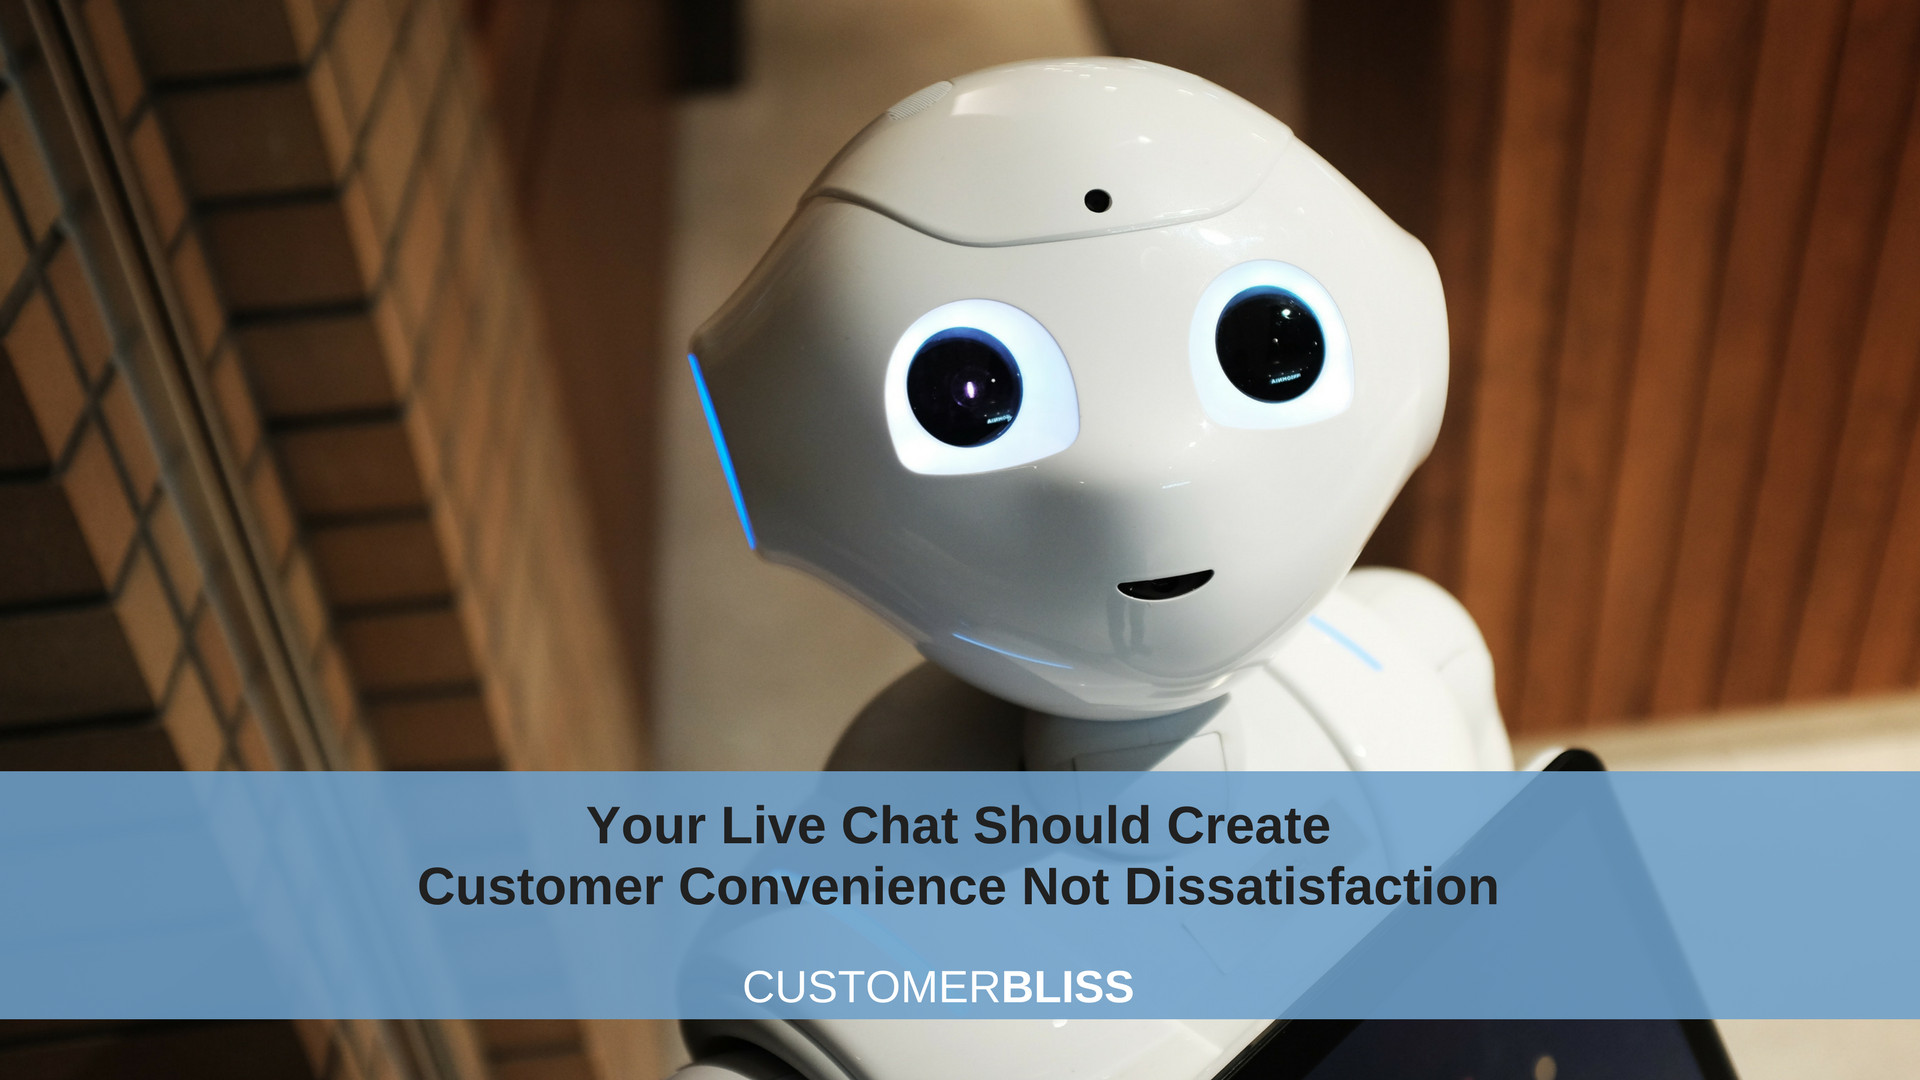 Your Live Chat Should Create Customer Convenience Not Dissatisfaction